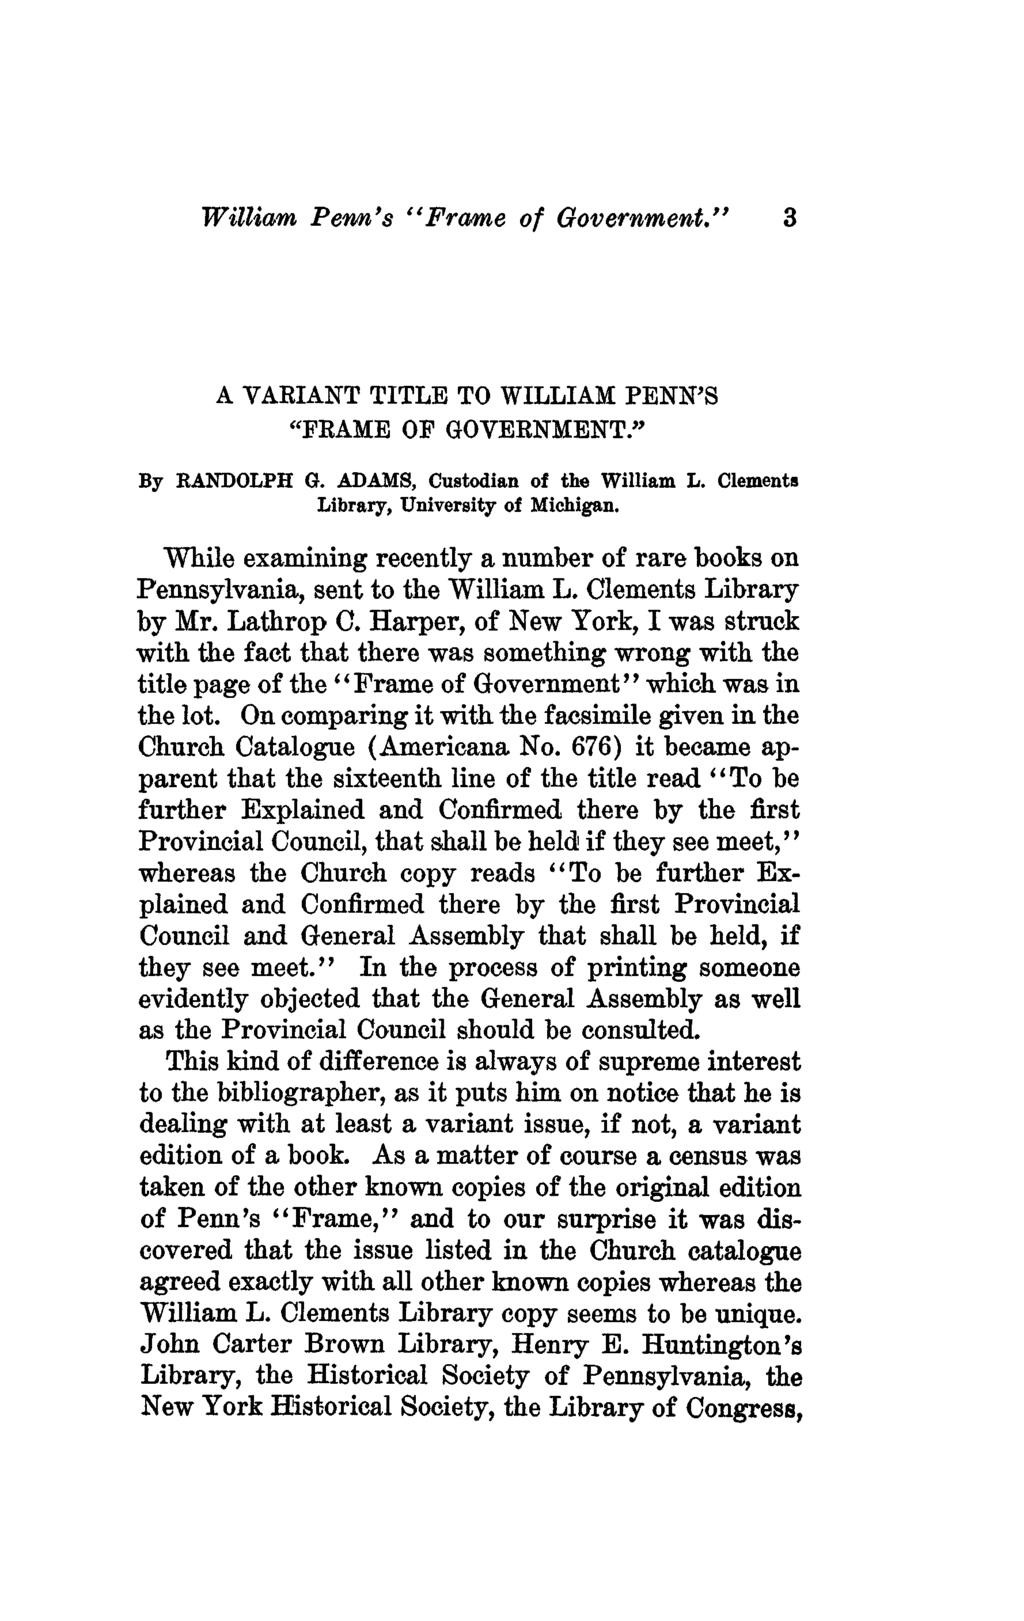 William Penn's "Frame of Government." A VAEIANT TITLE TO WILLIAM PENN'S "FKAME OF GOVERNMENT» By RANDOLPH G. ADAMS, Custodian of the William L. Clements Library, University of Michigan.